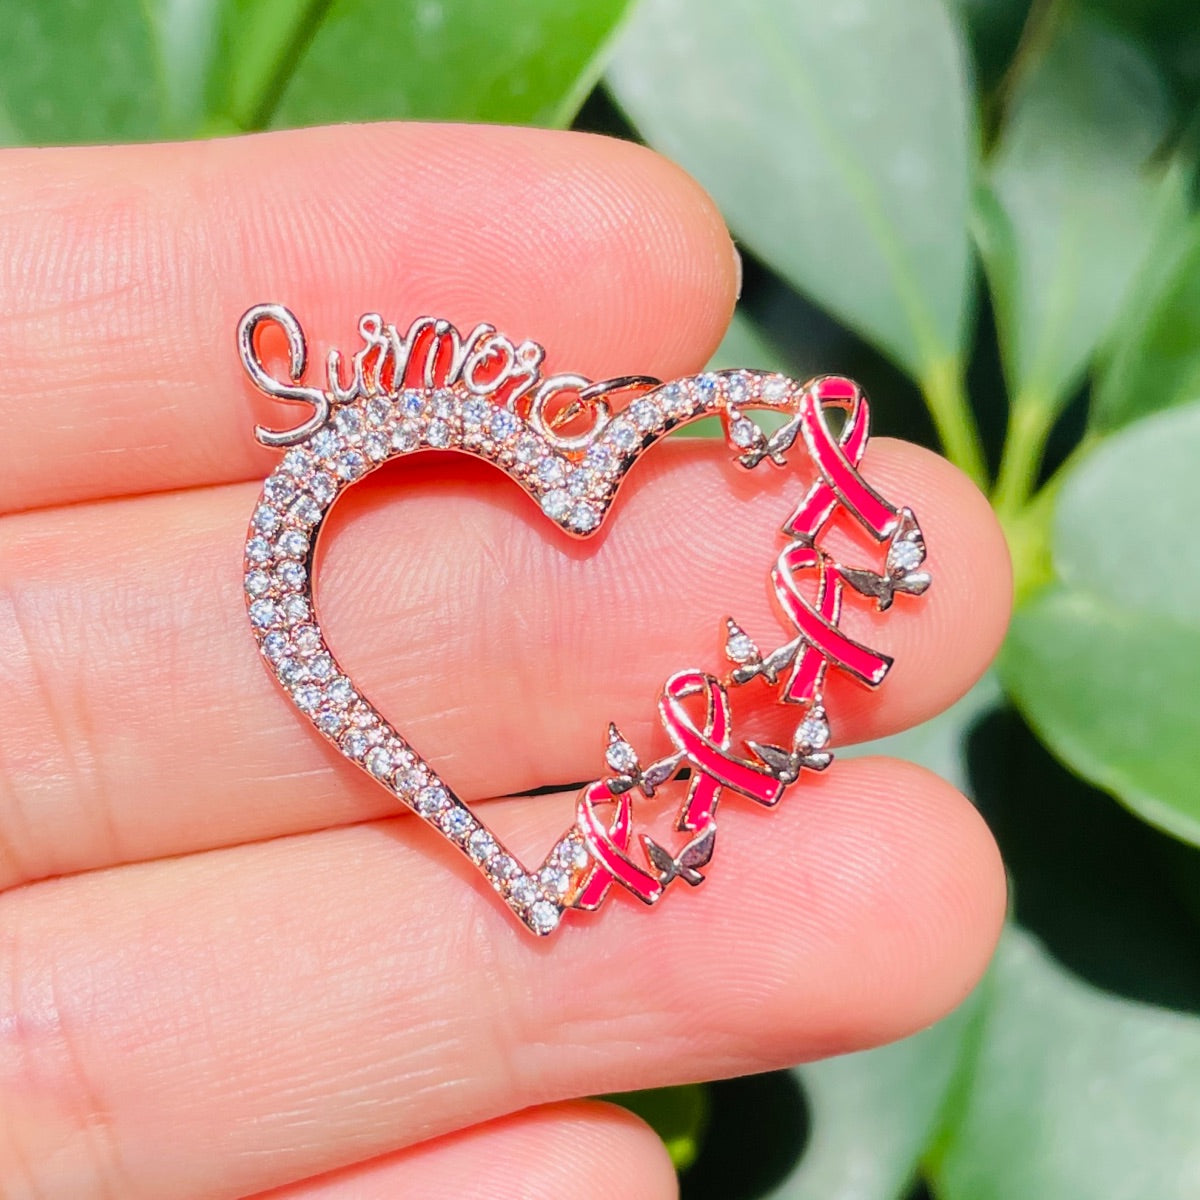 10pcs/lot CZ Pave Pink Ribbon Survivor Heart Charms - Breast Cancer Awareness Rose Gold CZ Paved Charms Breast Cancer Awareness New Charms Arrivals Charms Beads Beyond